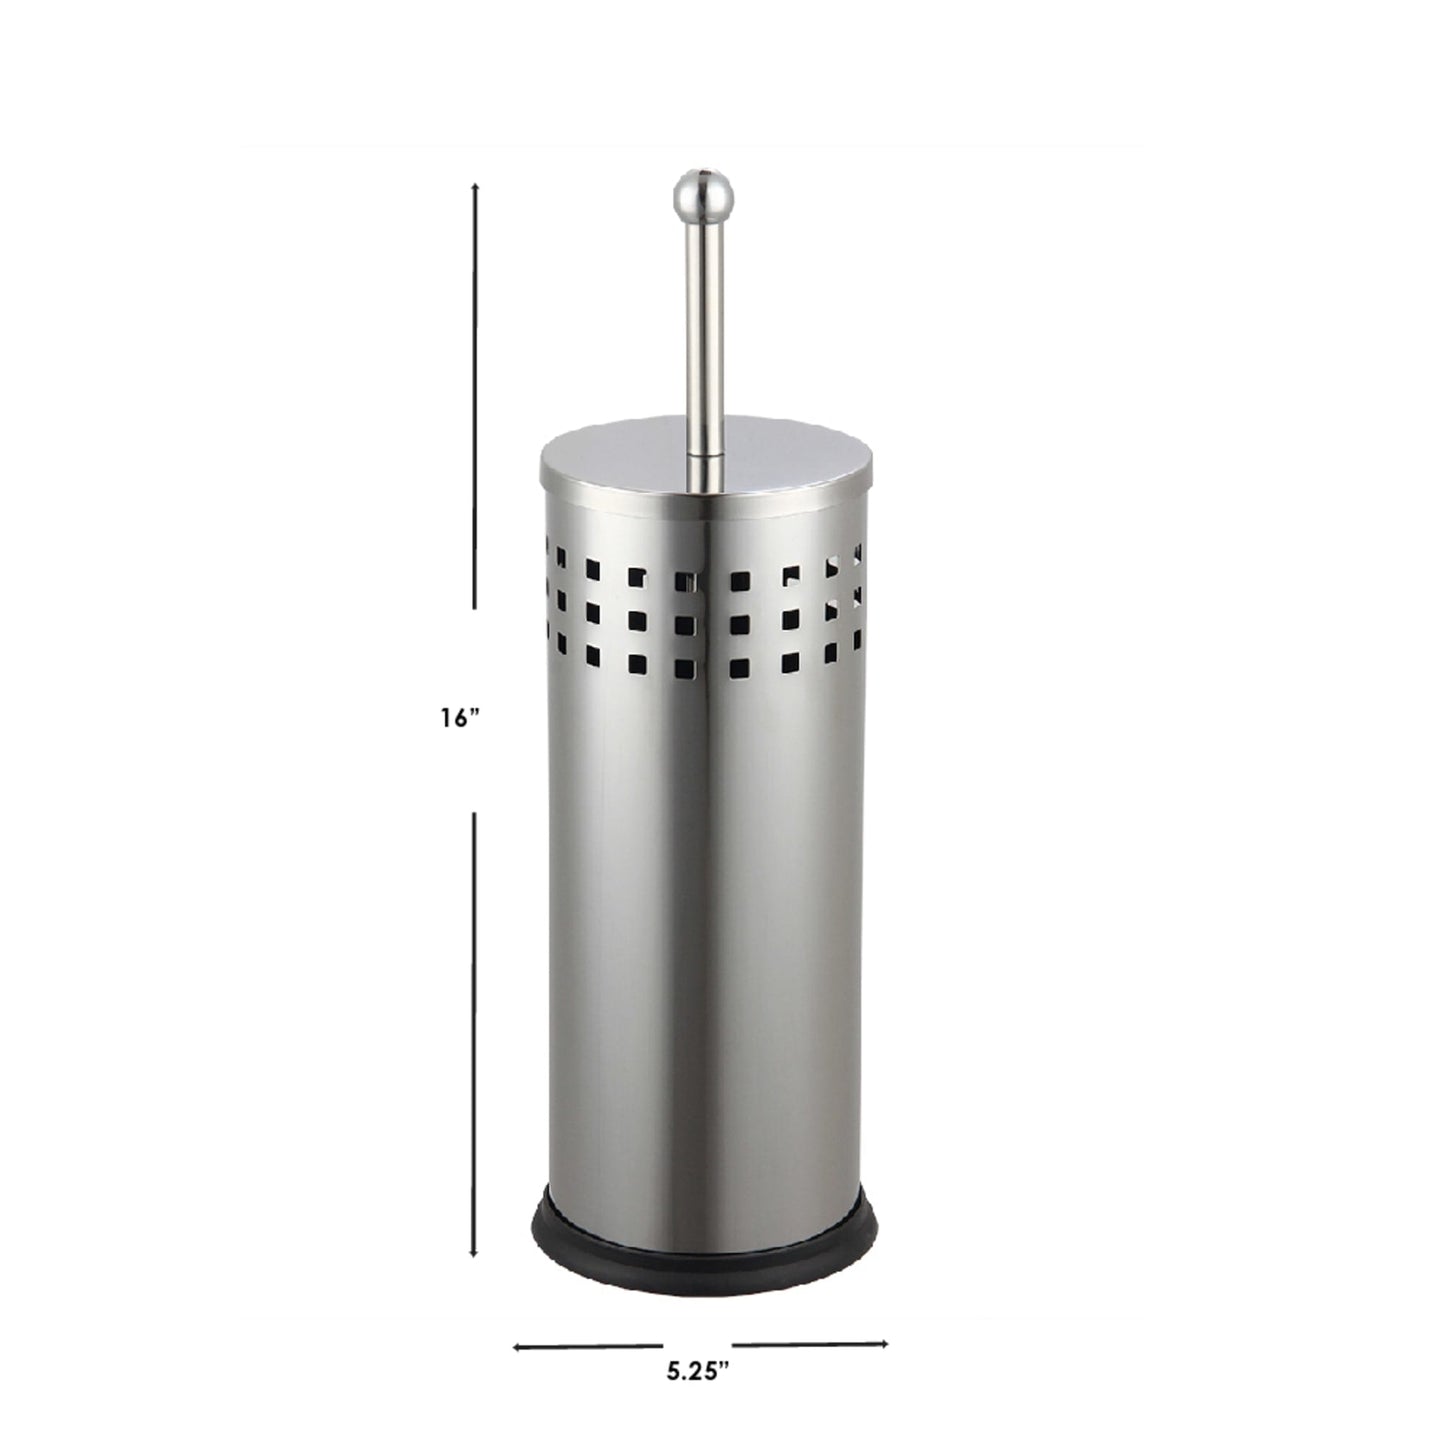 Brushed Stainless Steel Toilet Plunger